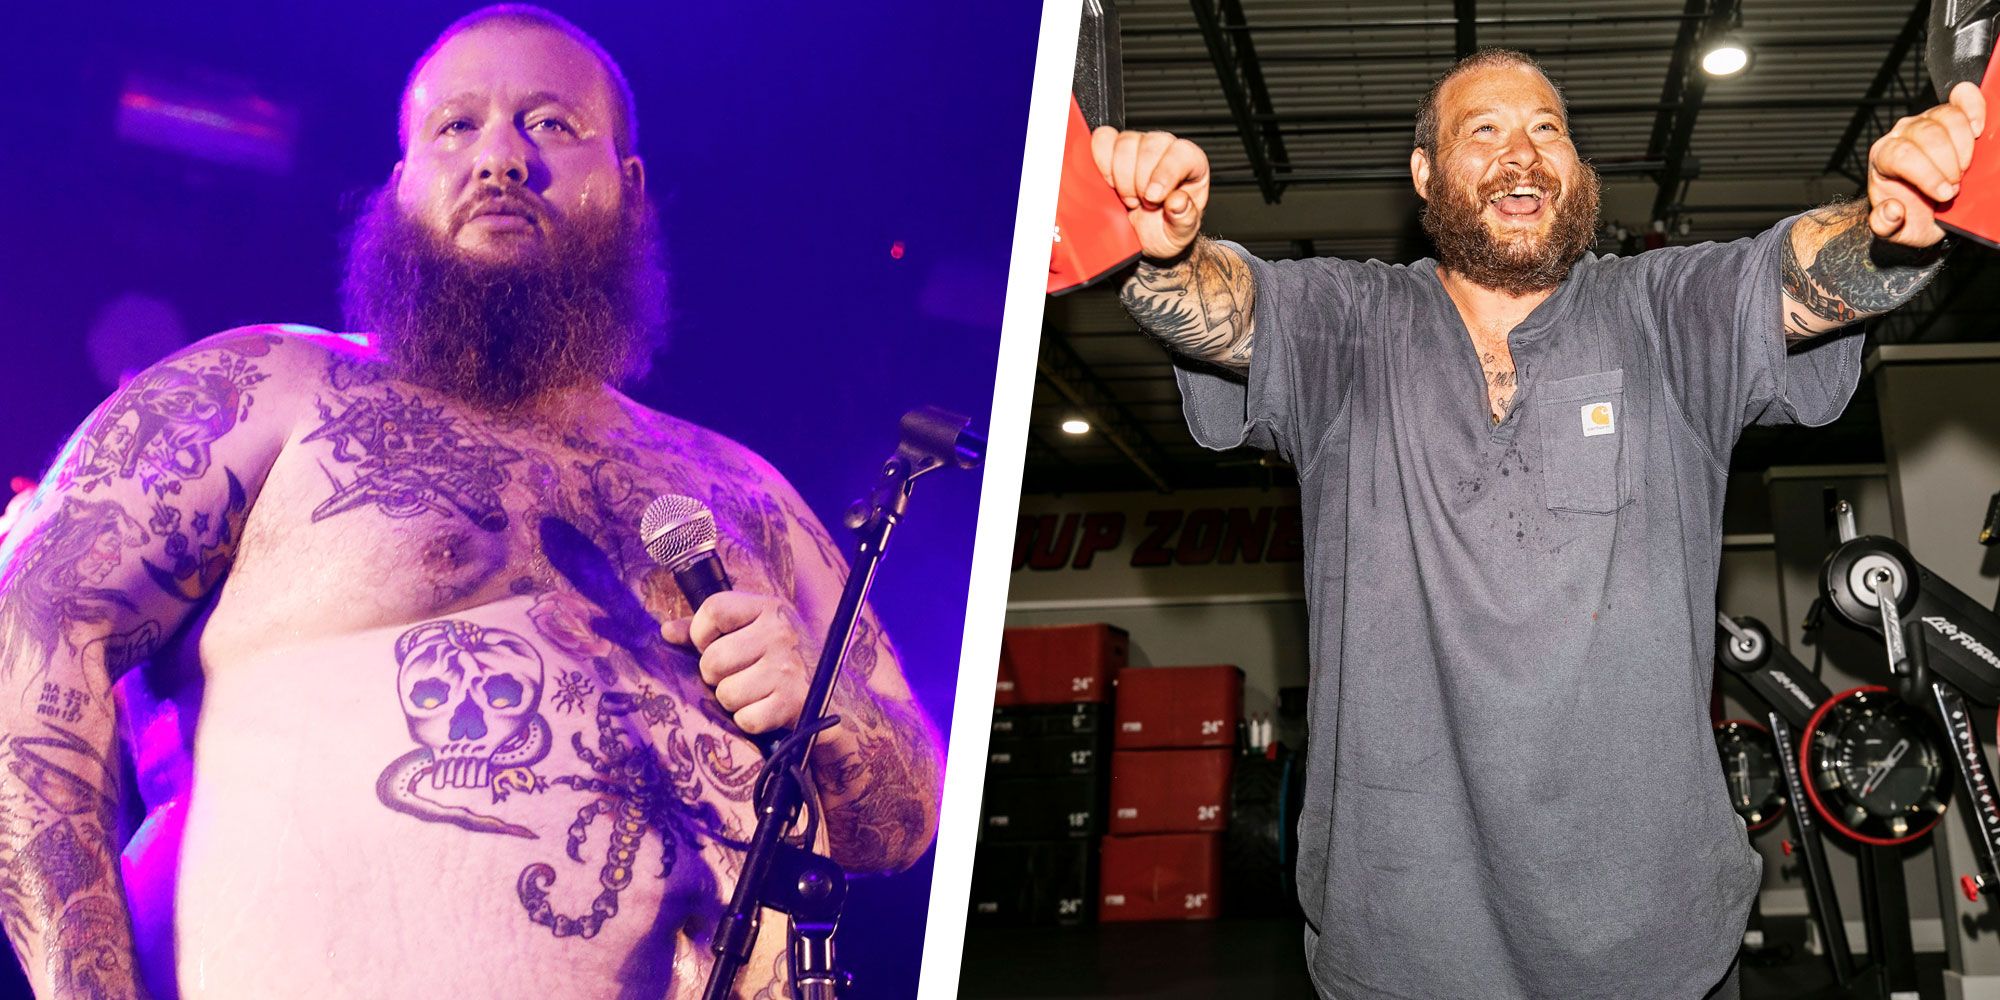 OF COURSE Action Bronson brought a kettlebell to the pizza joint. 